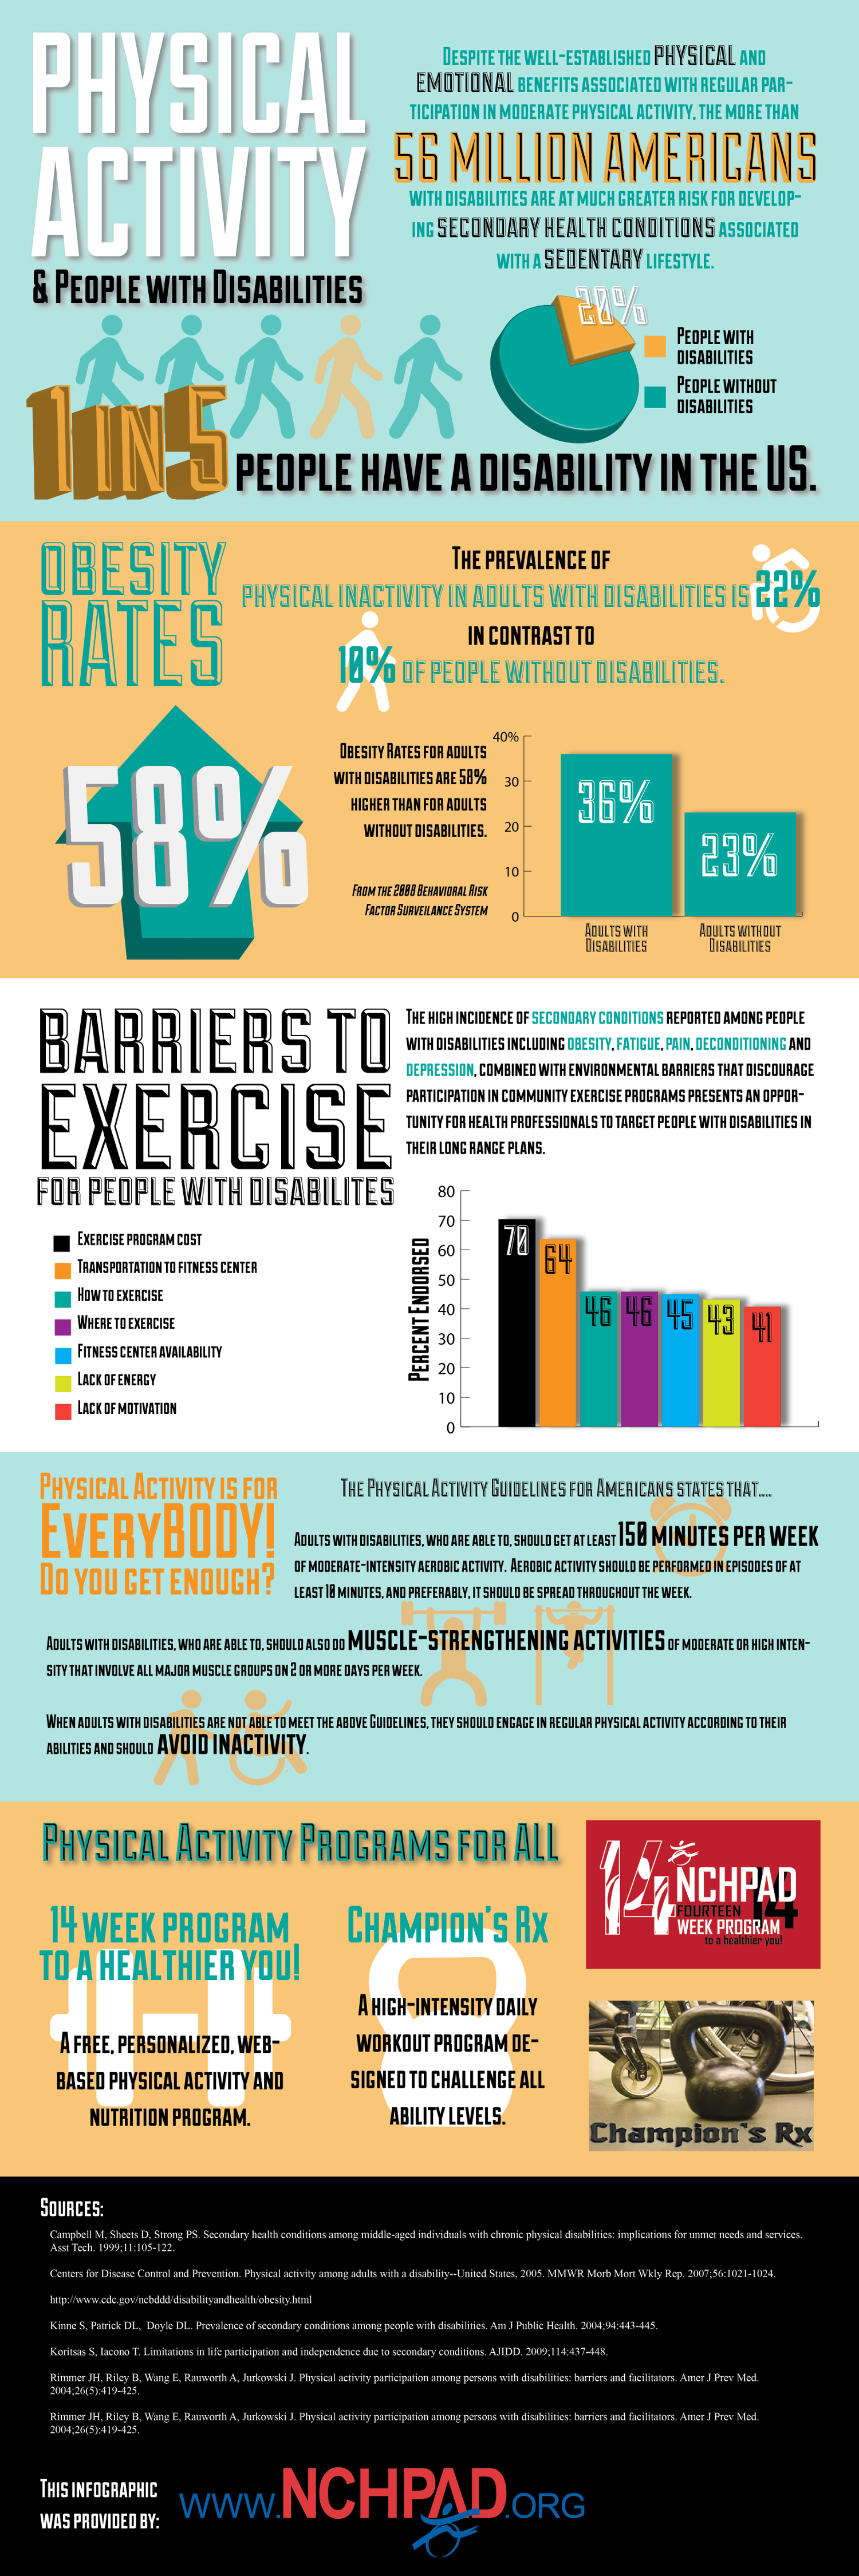 Physical Activity & People With Disabilities INFOGRAPHIC : NCHPAD ...